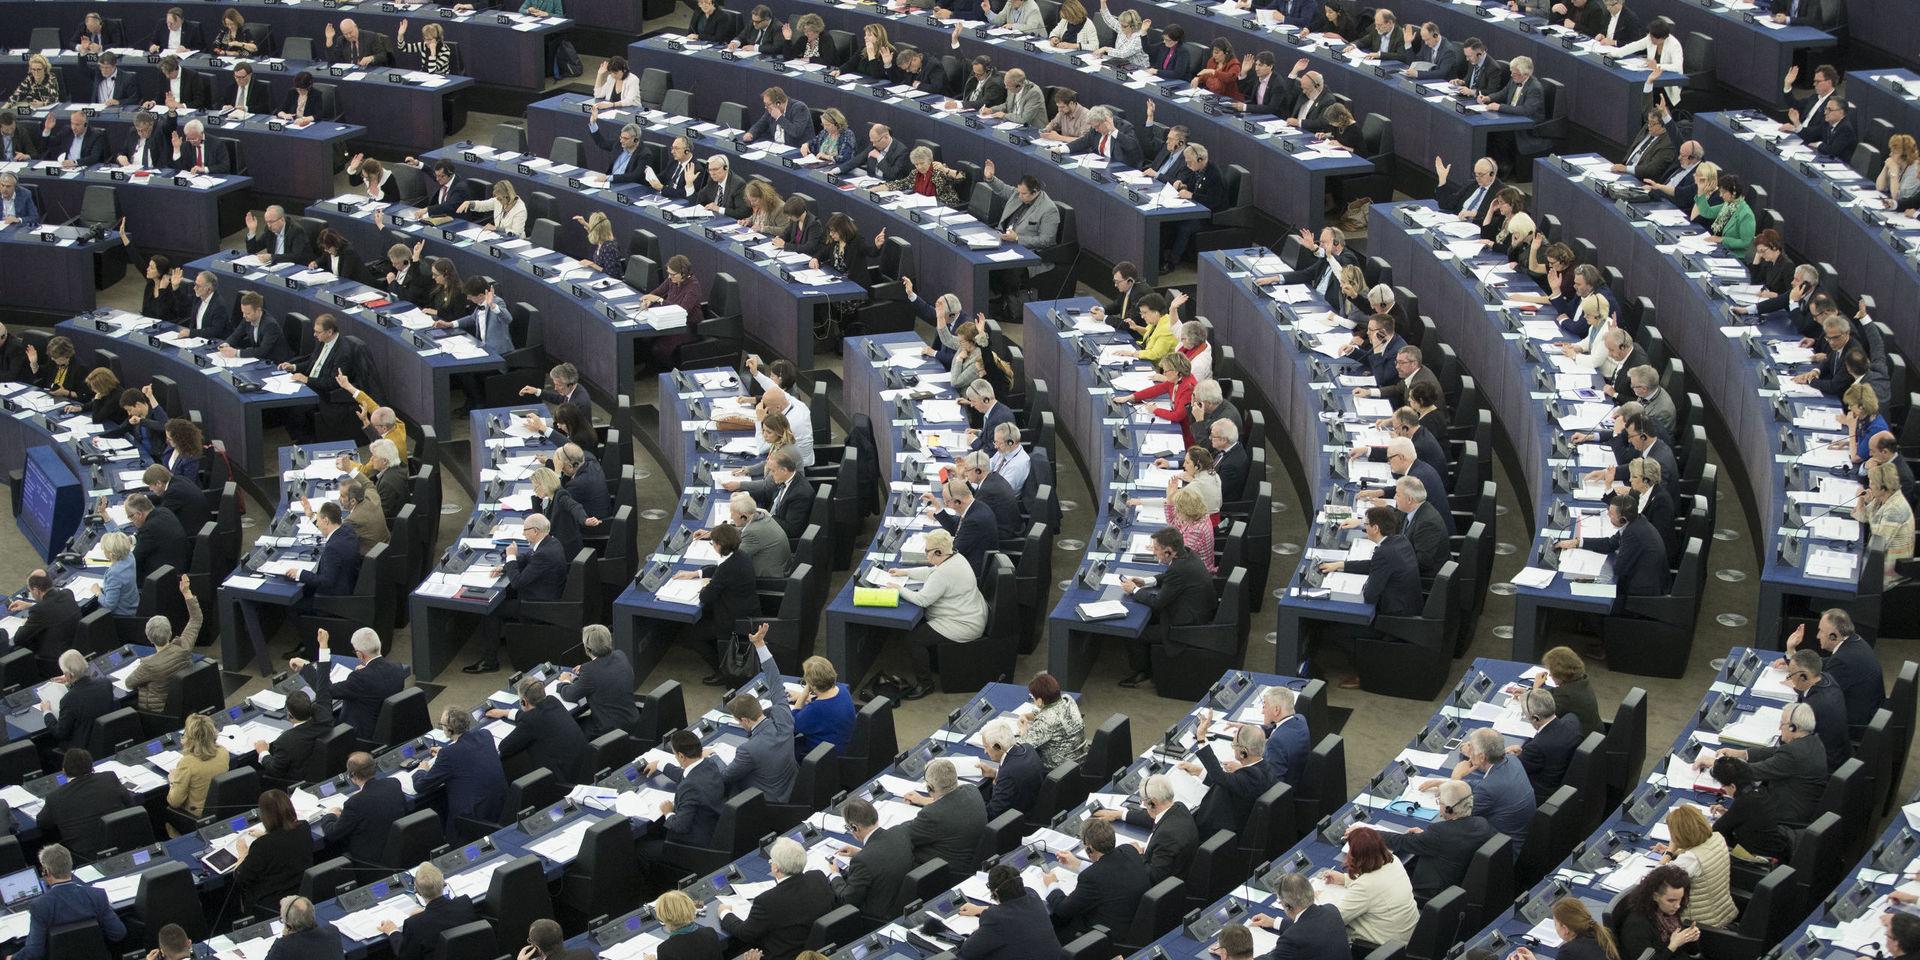 A view of the European Parliament during a plenary session in Strasbourg, eastern France, Wednesday March 27, 2019. The Parliament discusses the conclusions of the 21-22 March EU summit, including Brexit, with European Council President Donald Tusk and Commission President Jean-Claude Juncker. (AP Photo/Jean-Francois Badias)